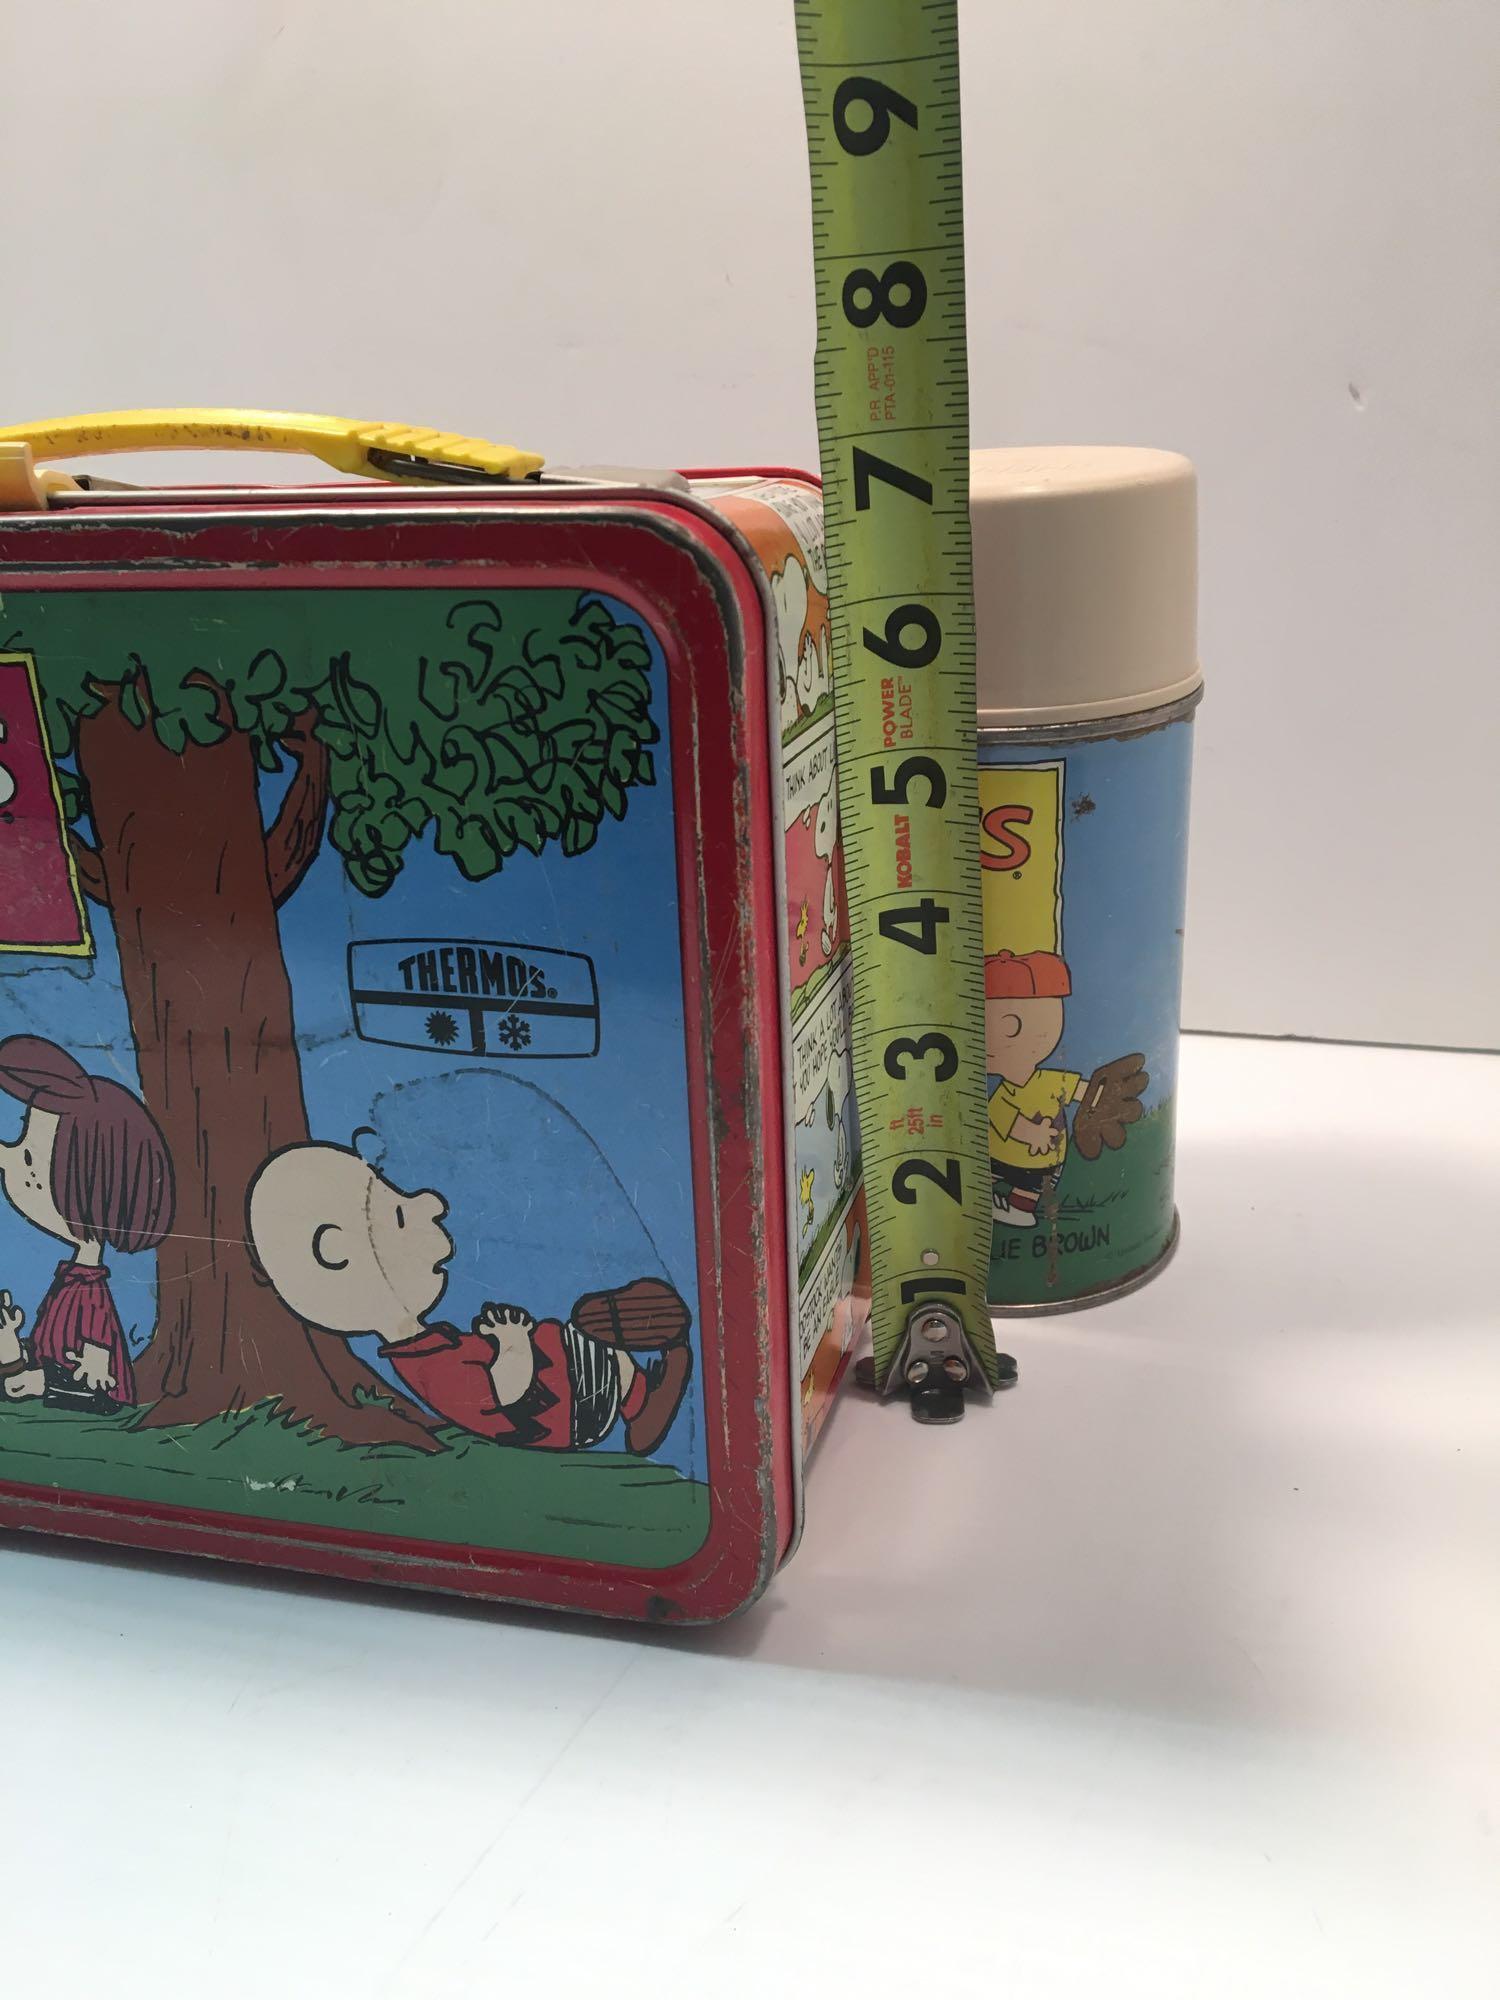 Peanuts thermos and lunch box